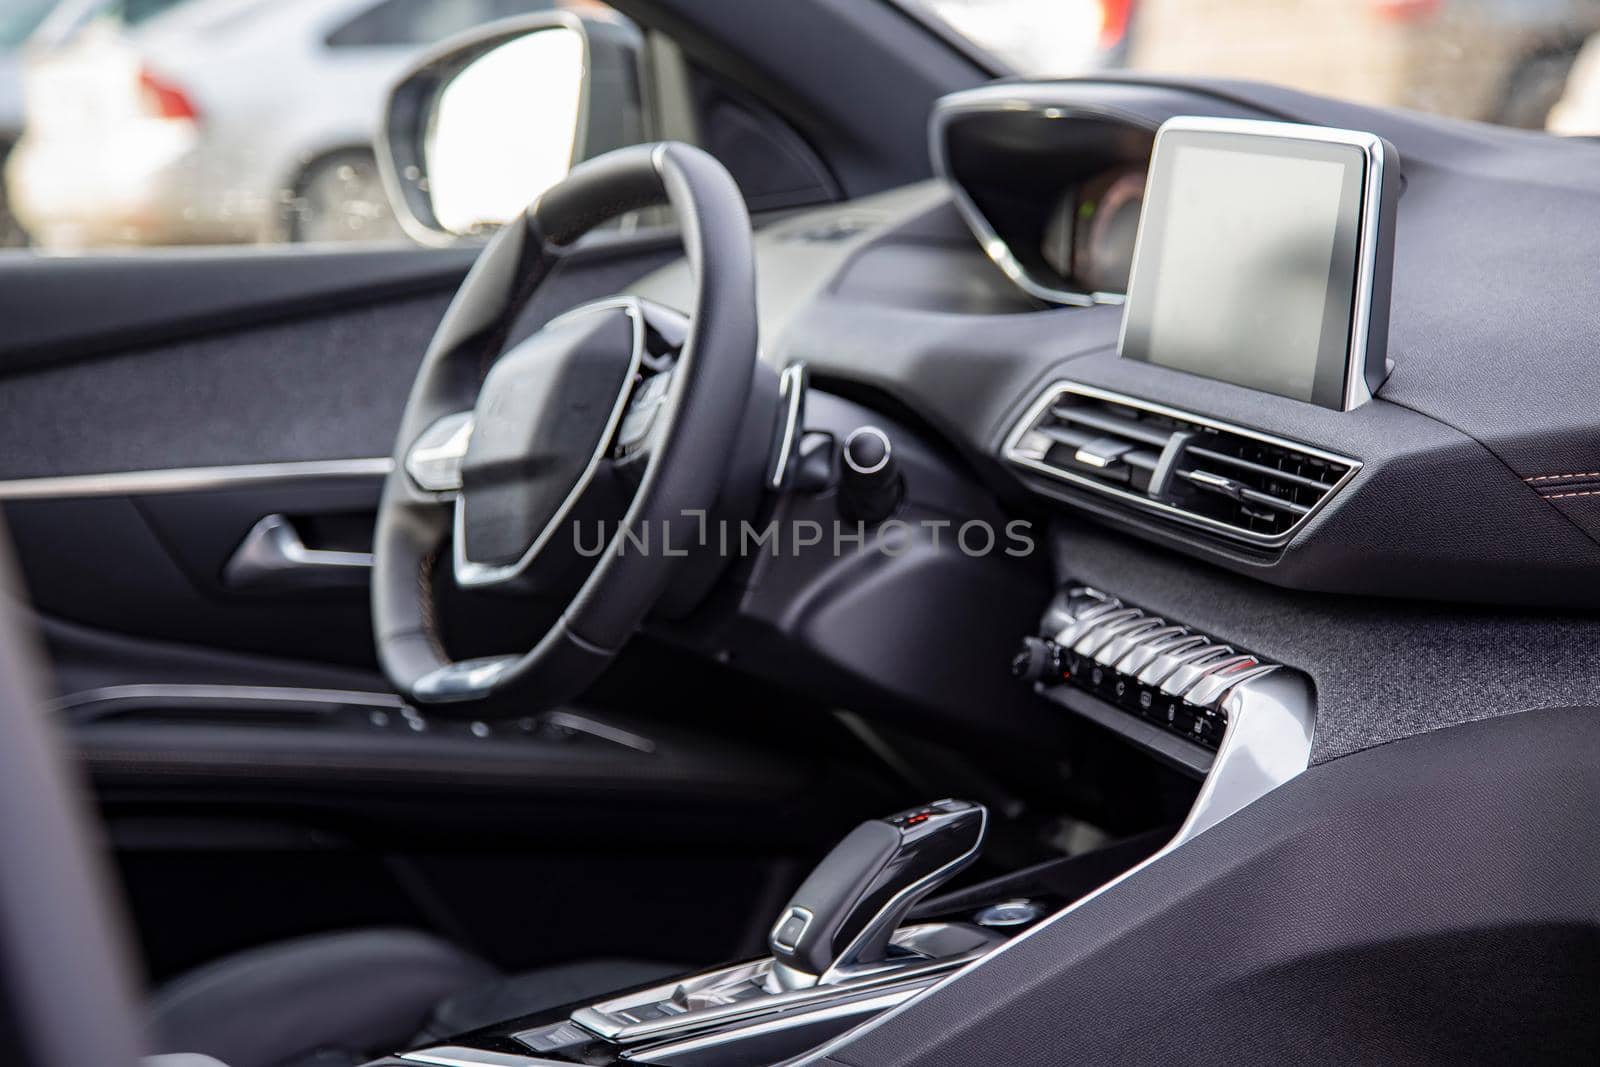 Dark luxury car interior. Black leather multifunctional steering wheel, start and stop engine buttom, dashboard, steering wheel and driver seat by Mariaprovector